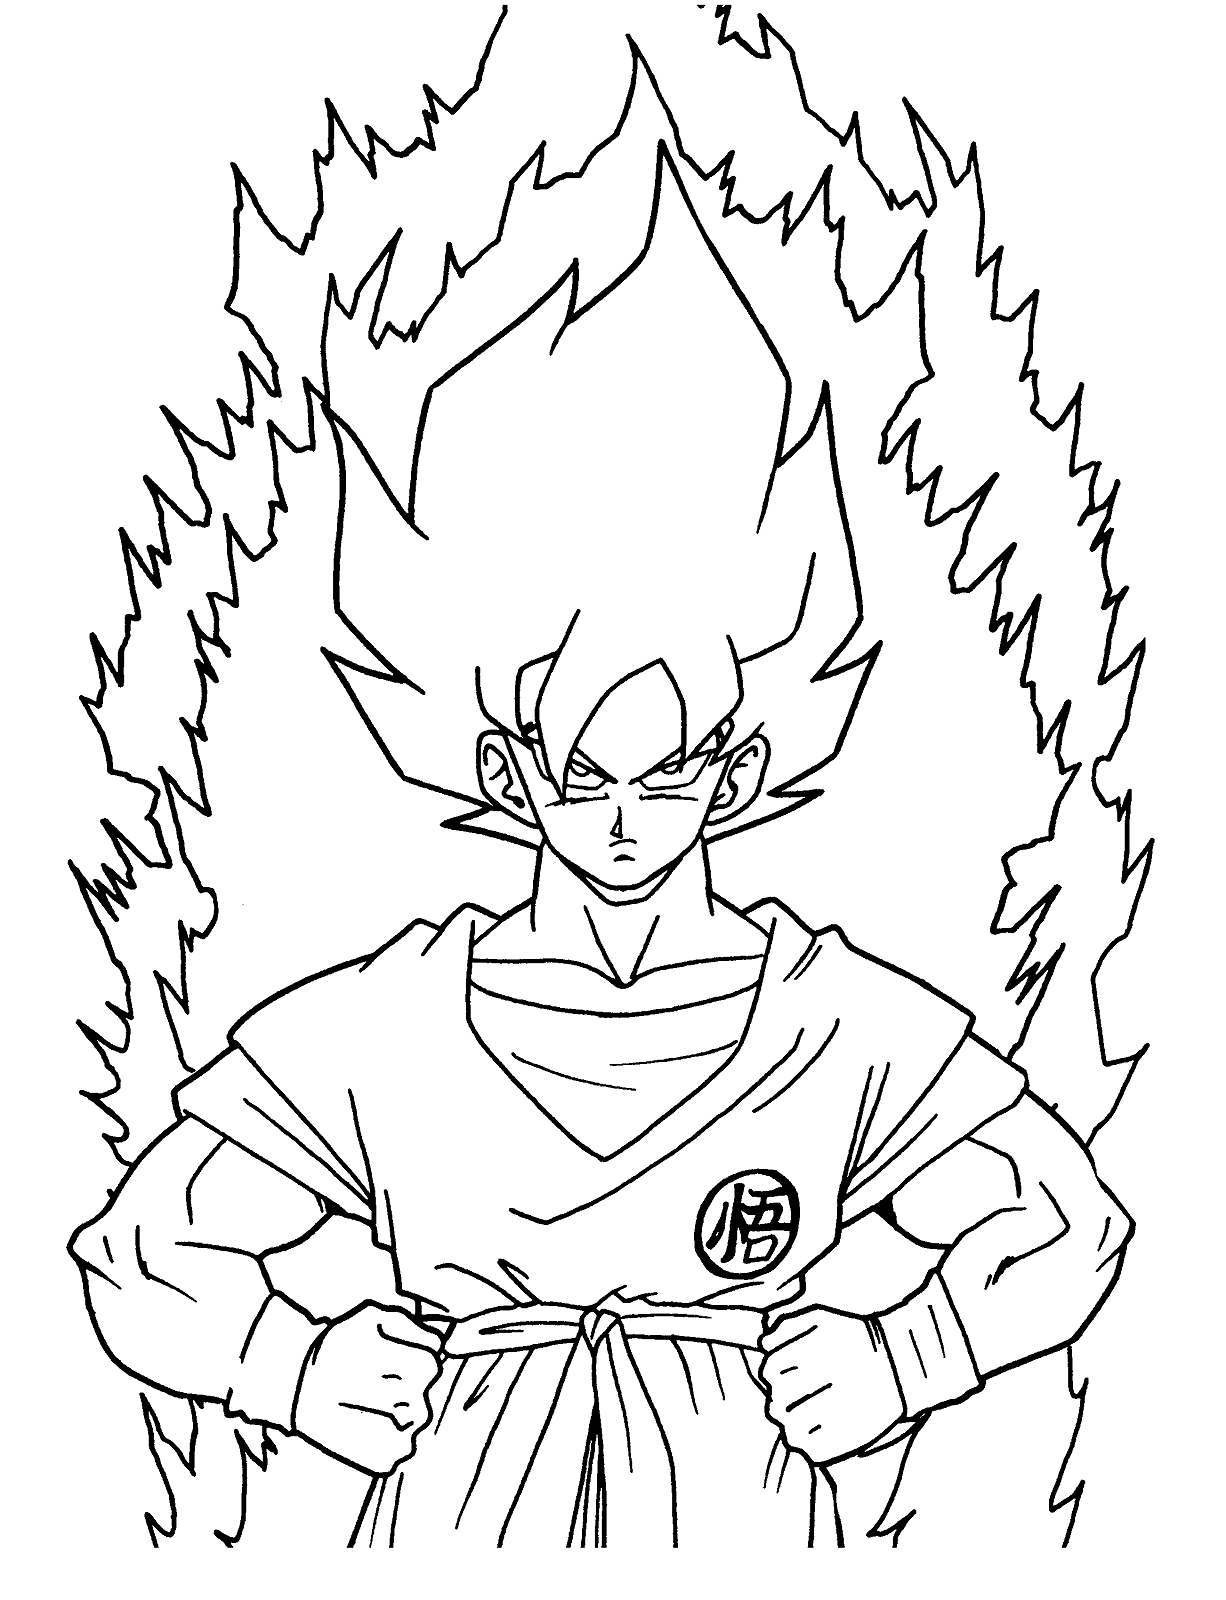 Dragon Ball Z Coloring Pages - Coloring Pages For Kids And Adults